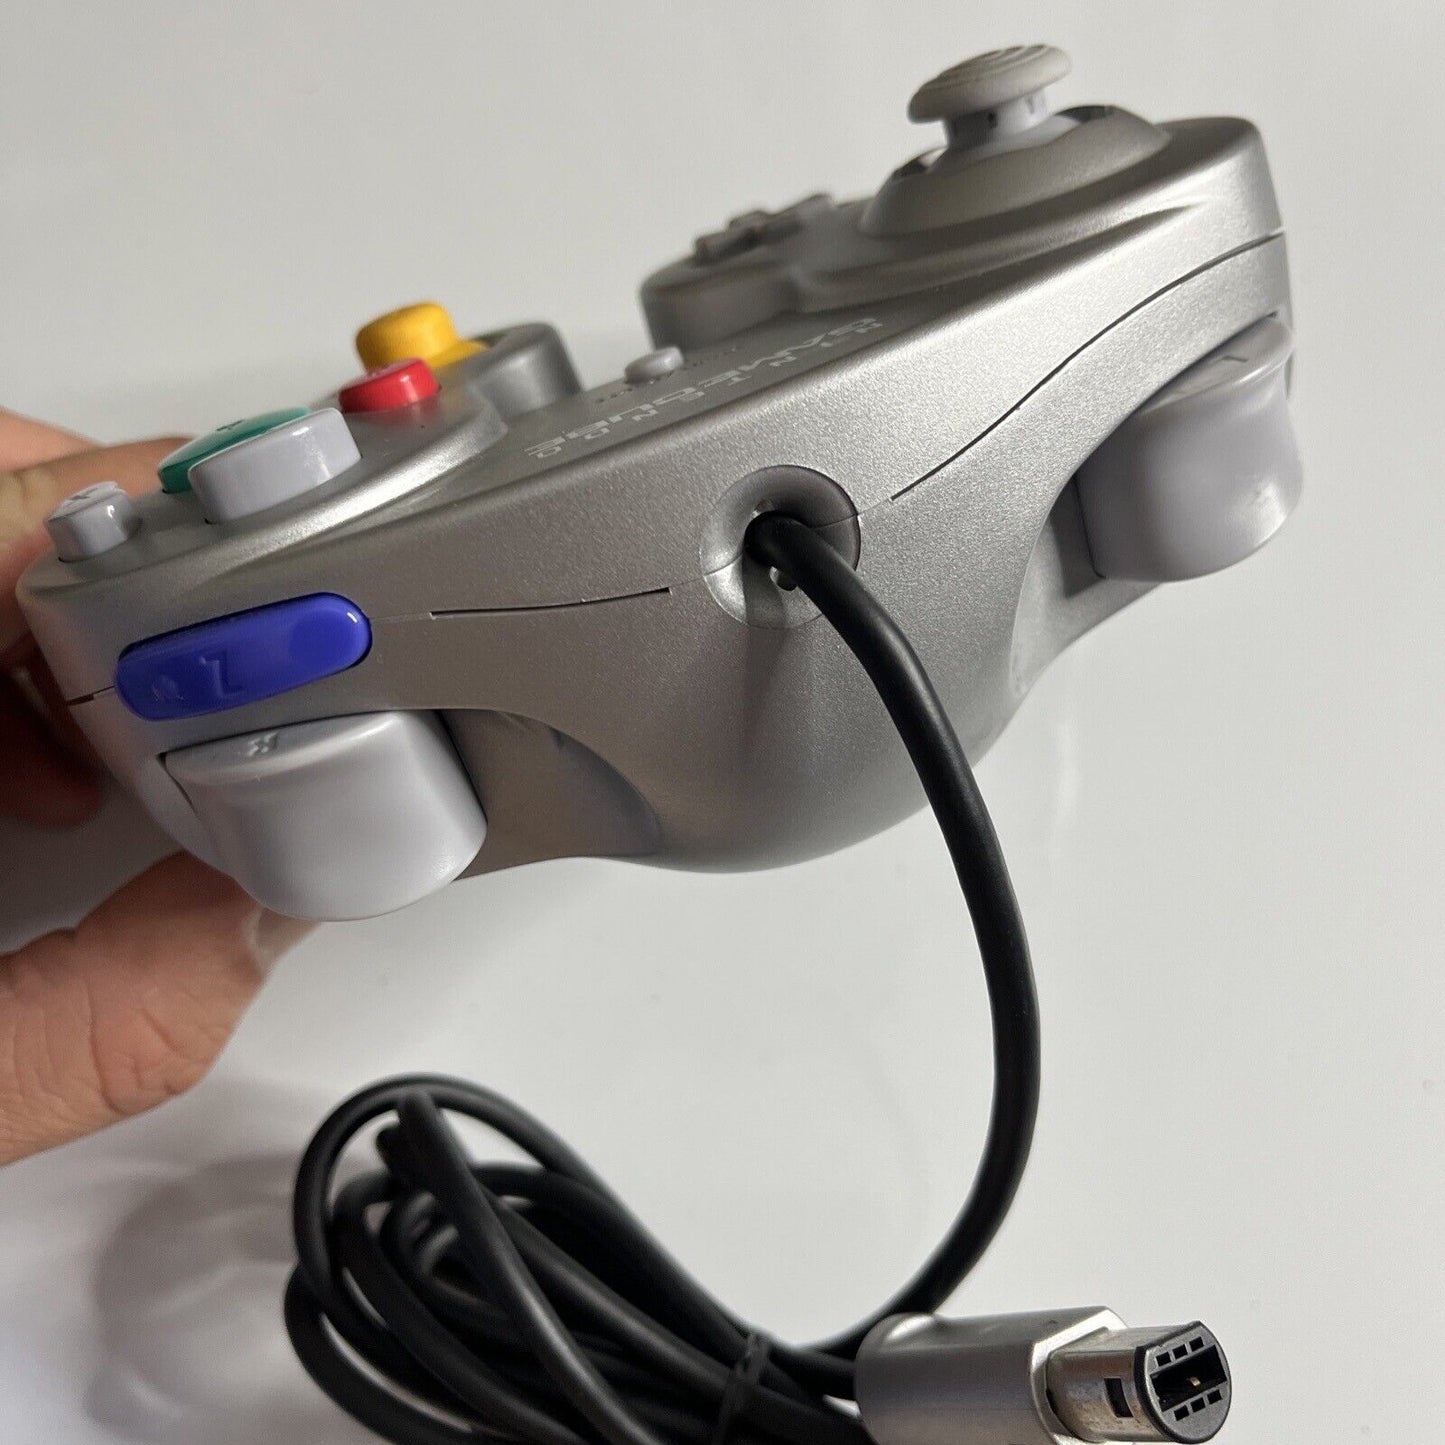 Official Nintendo GameCube Controller Silver - Genuine Tested and Cleaned